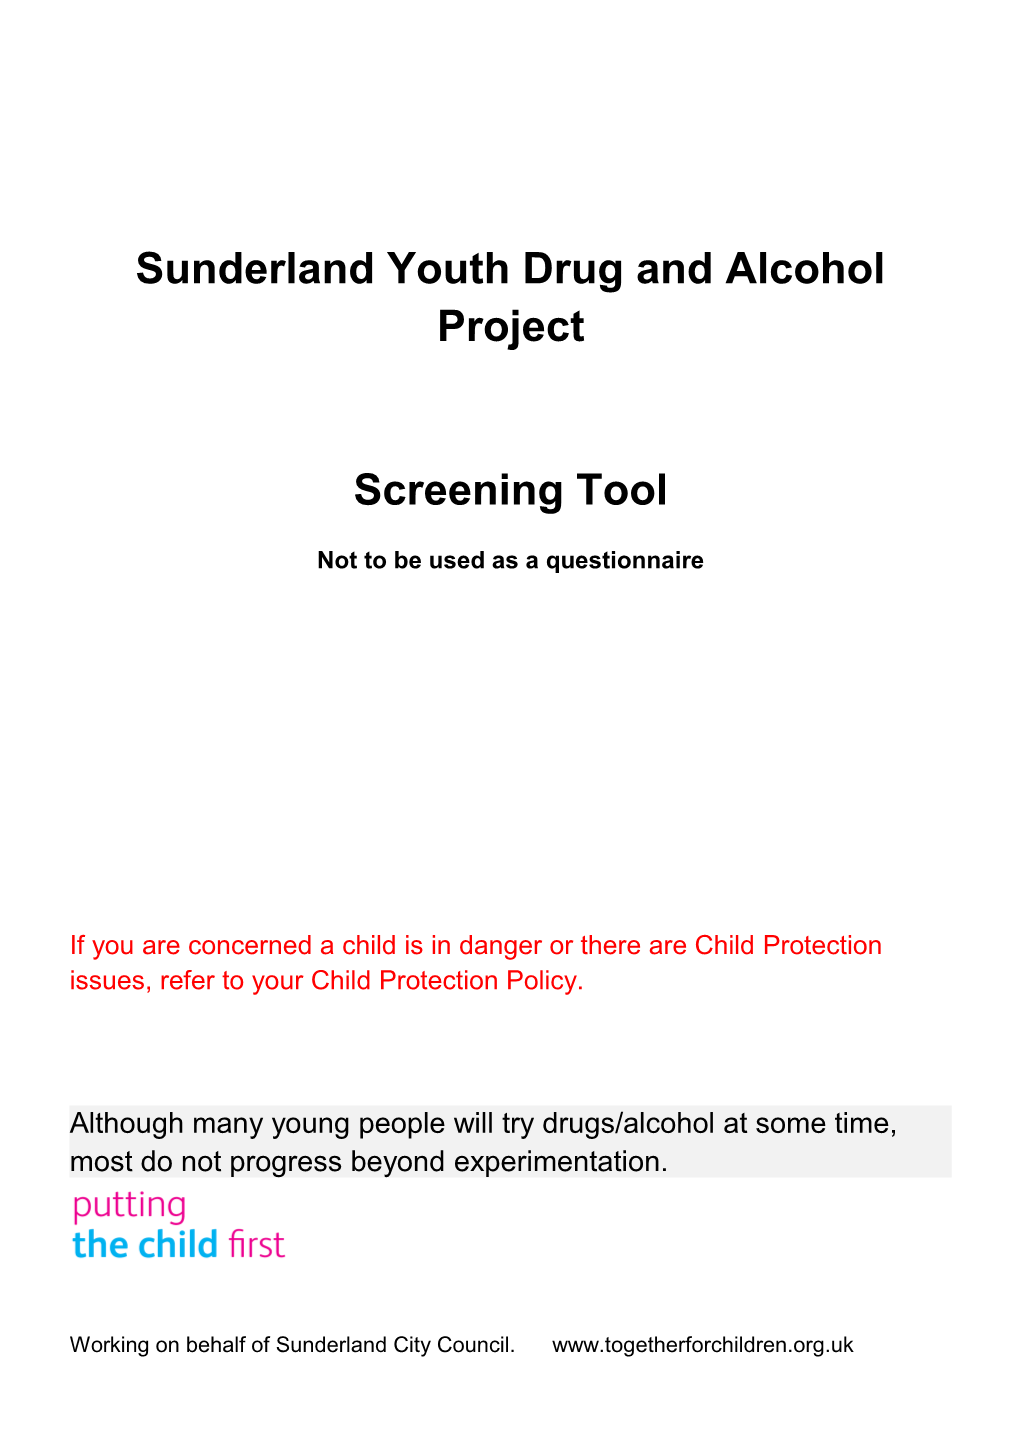 Sunderland Youth Drug and Alcohol Project